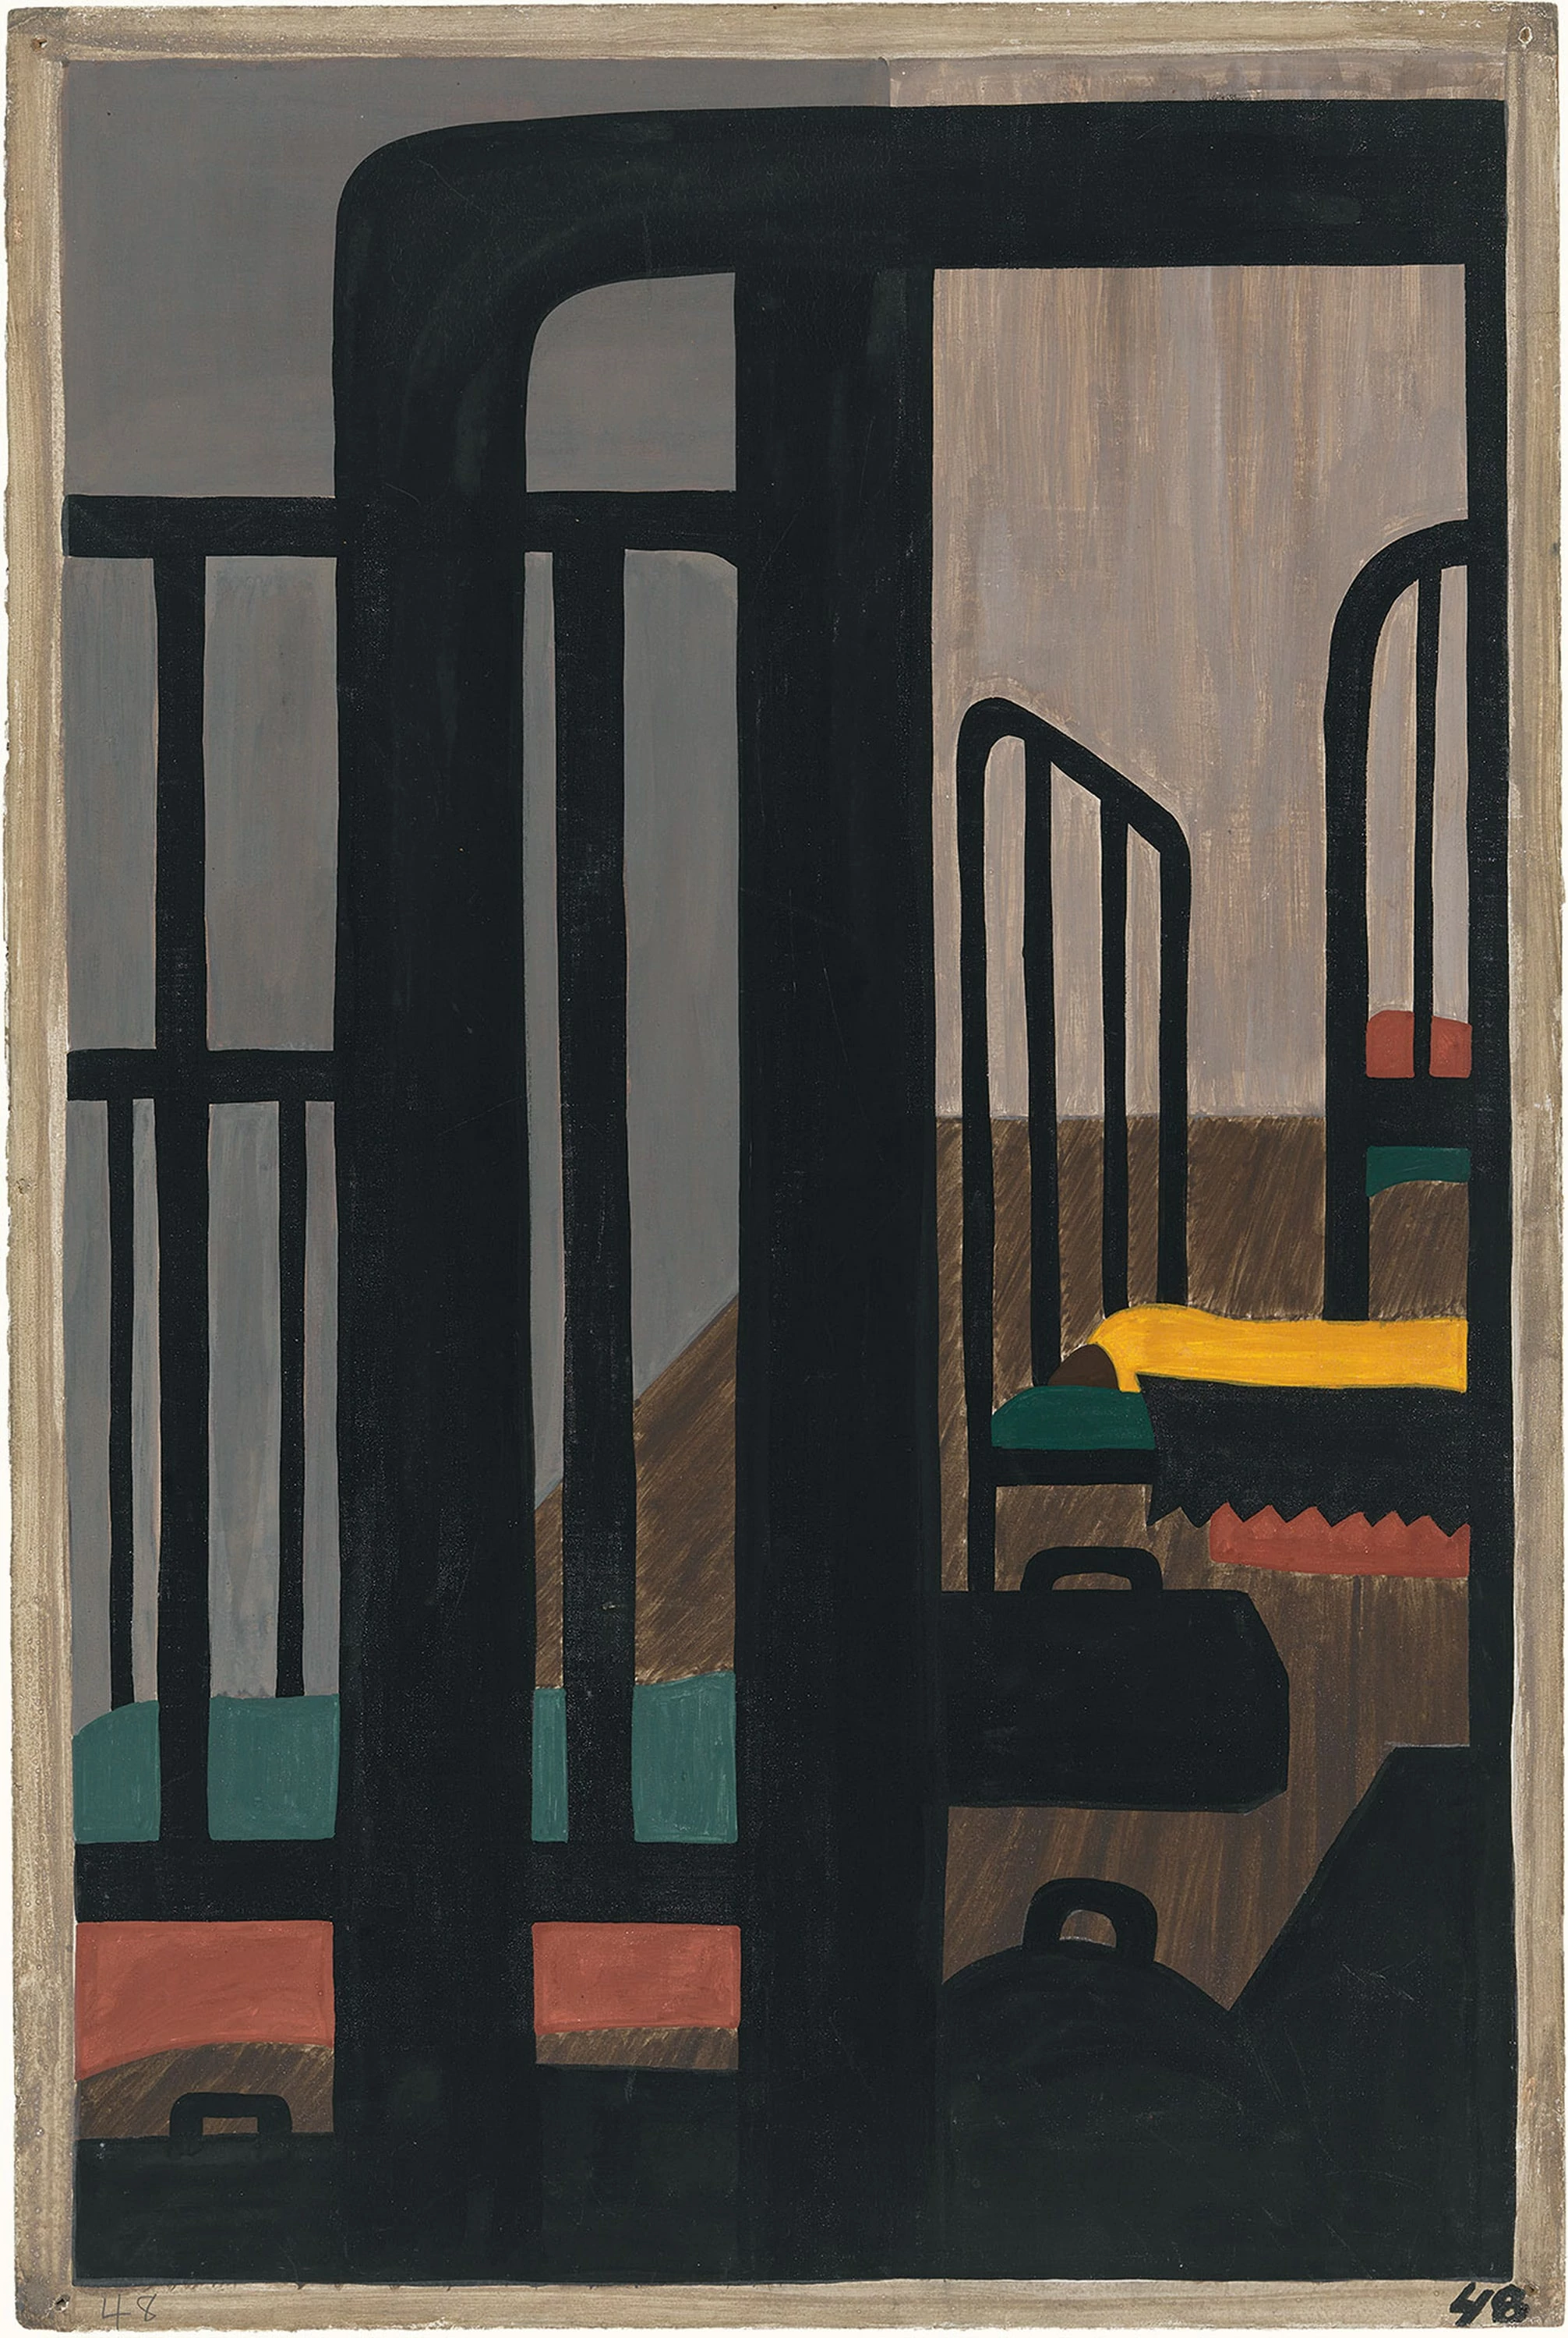 Migration Series No.48: Housing was a serious problem, Jacob Lawrence